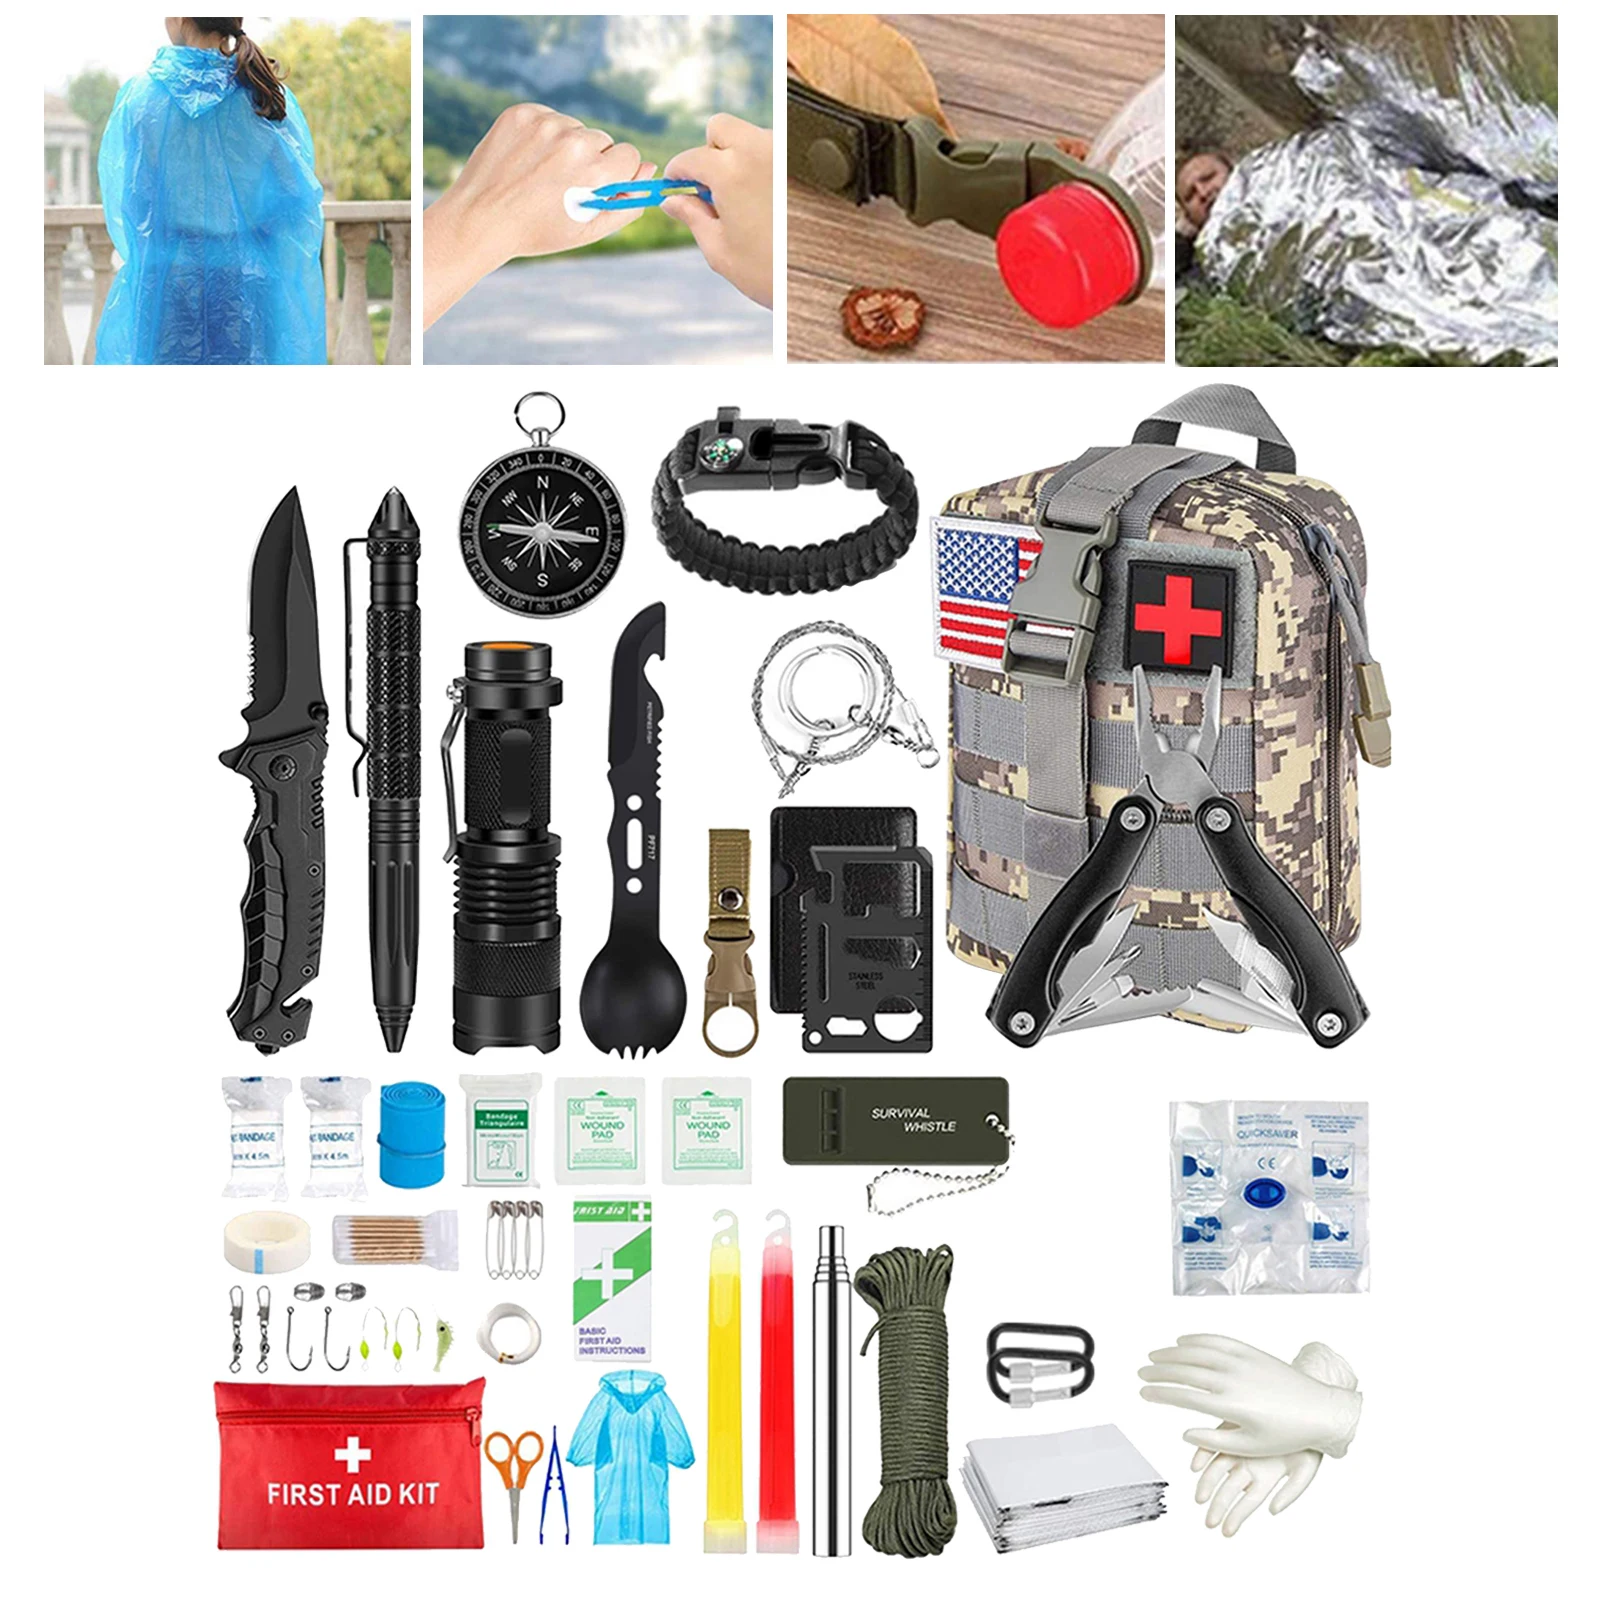 33 In 1 Emergency Survival Gear Kit   SOS  Birthday Gift Father